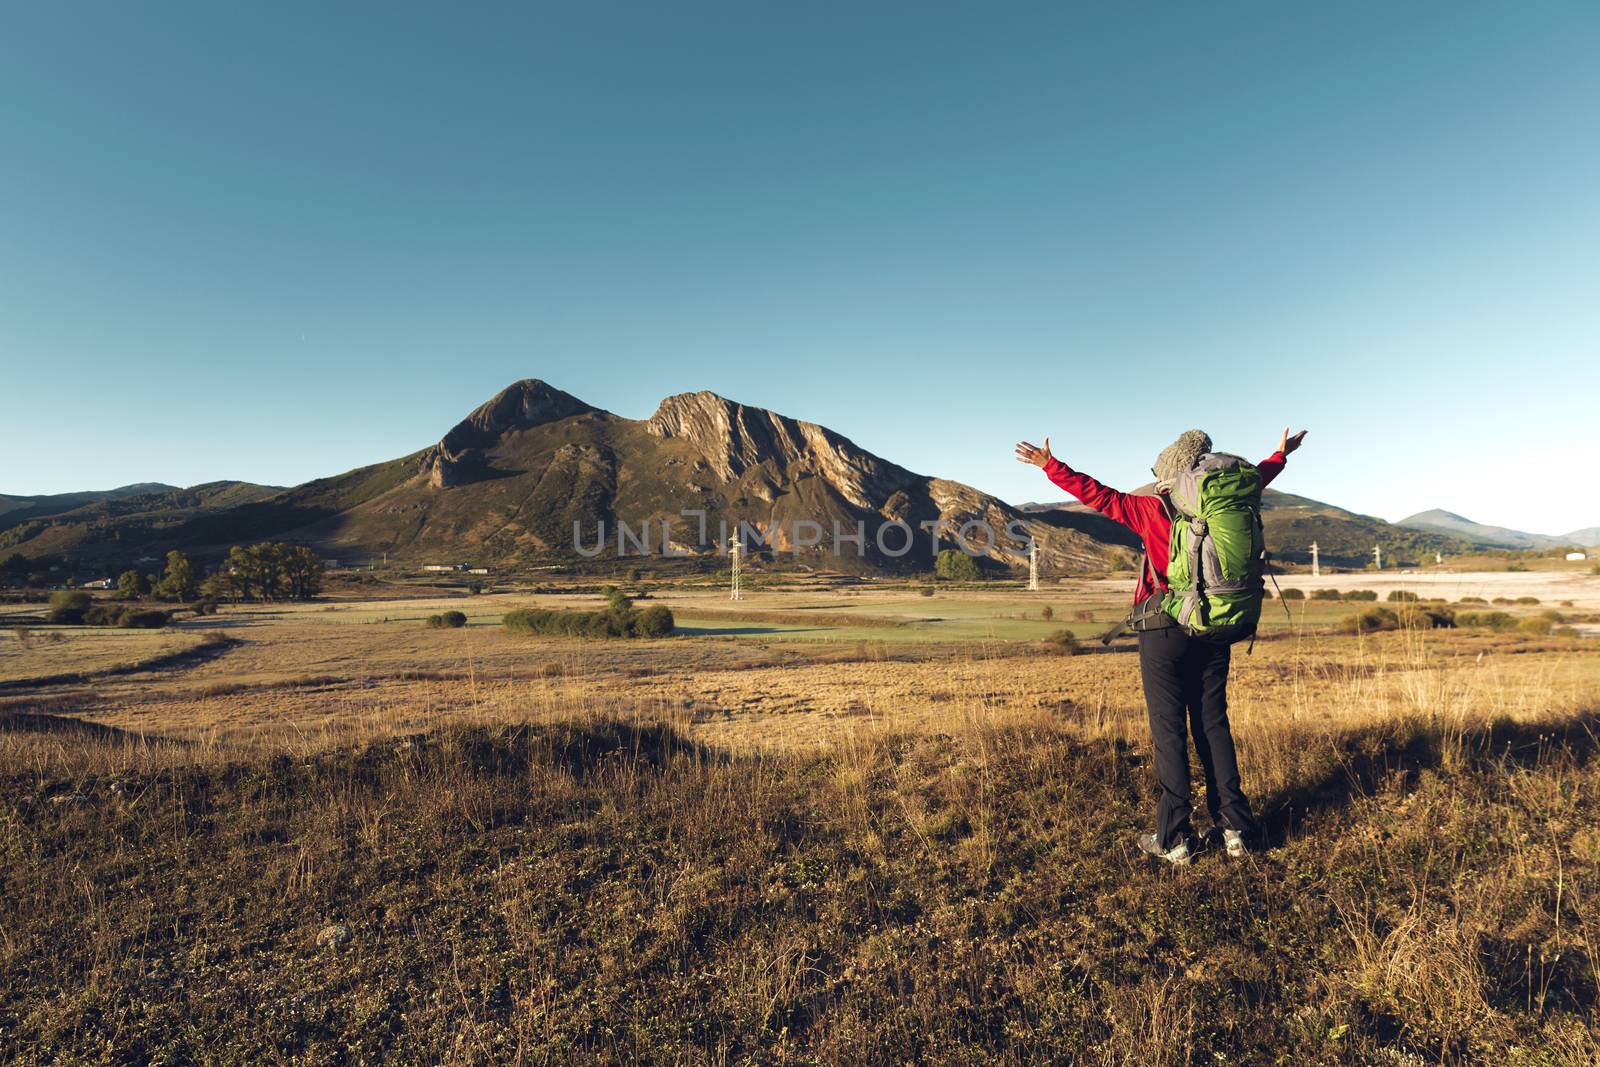 Rear view of a woman with arms raised and a backpack, enjoying the view